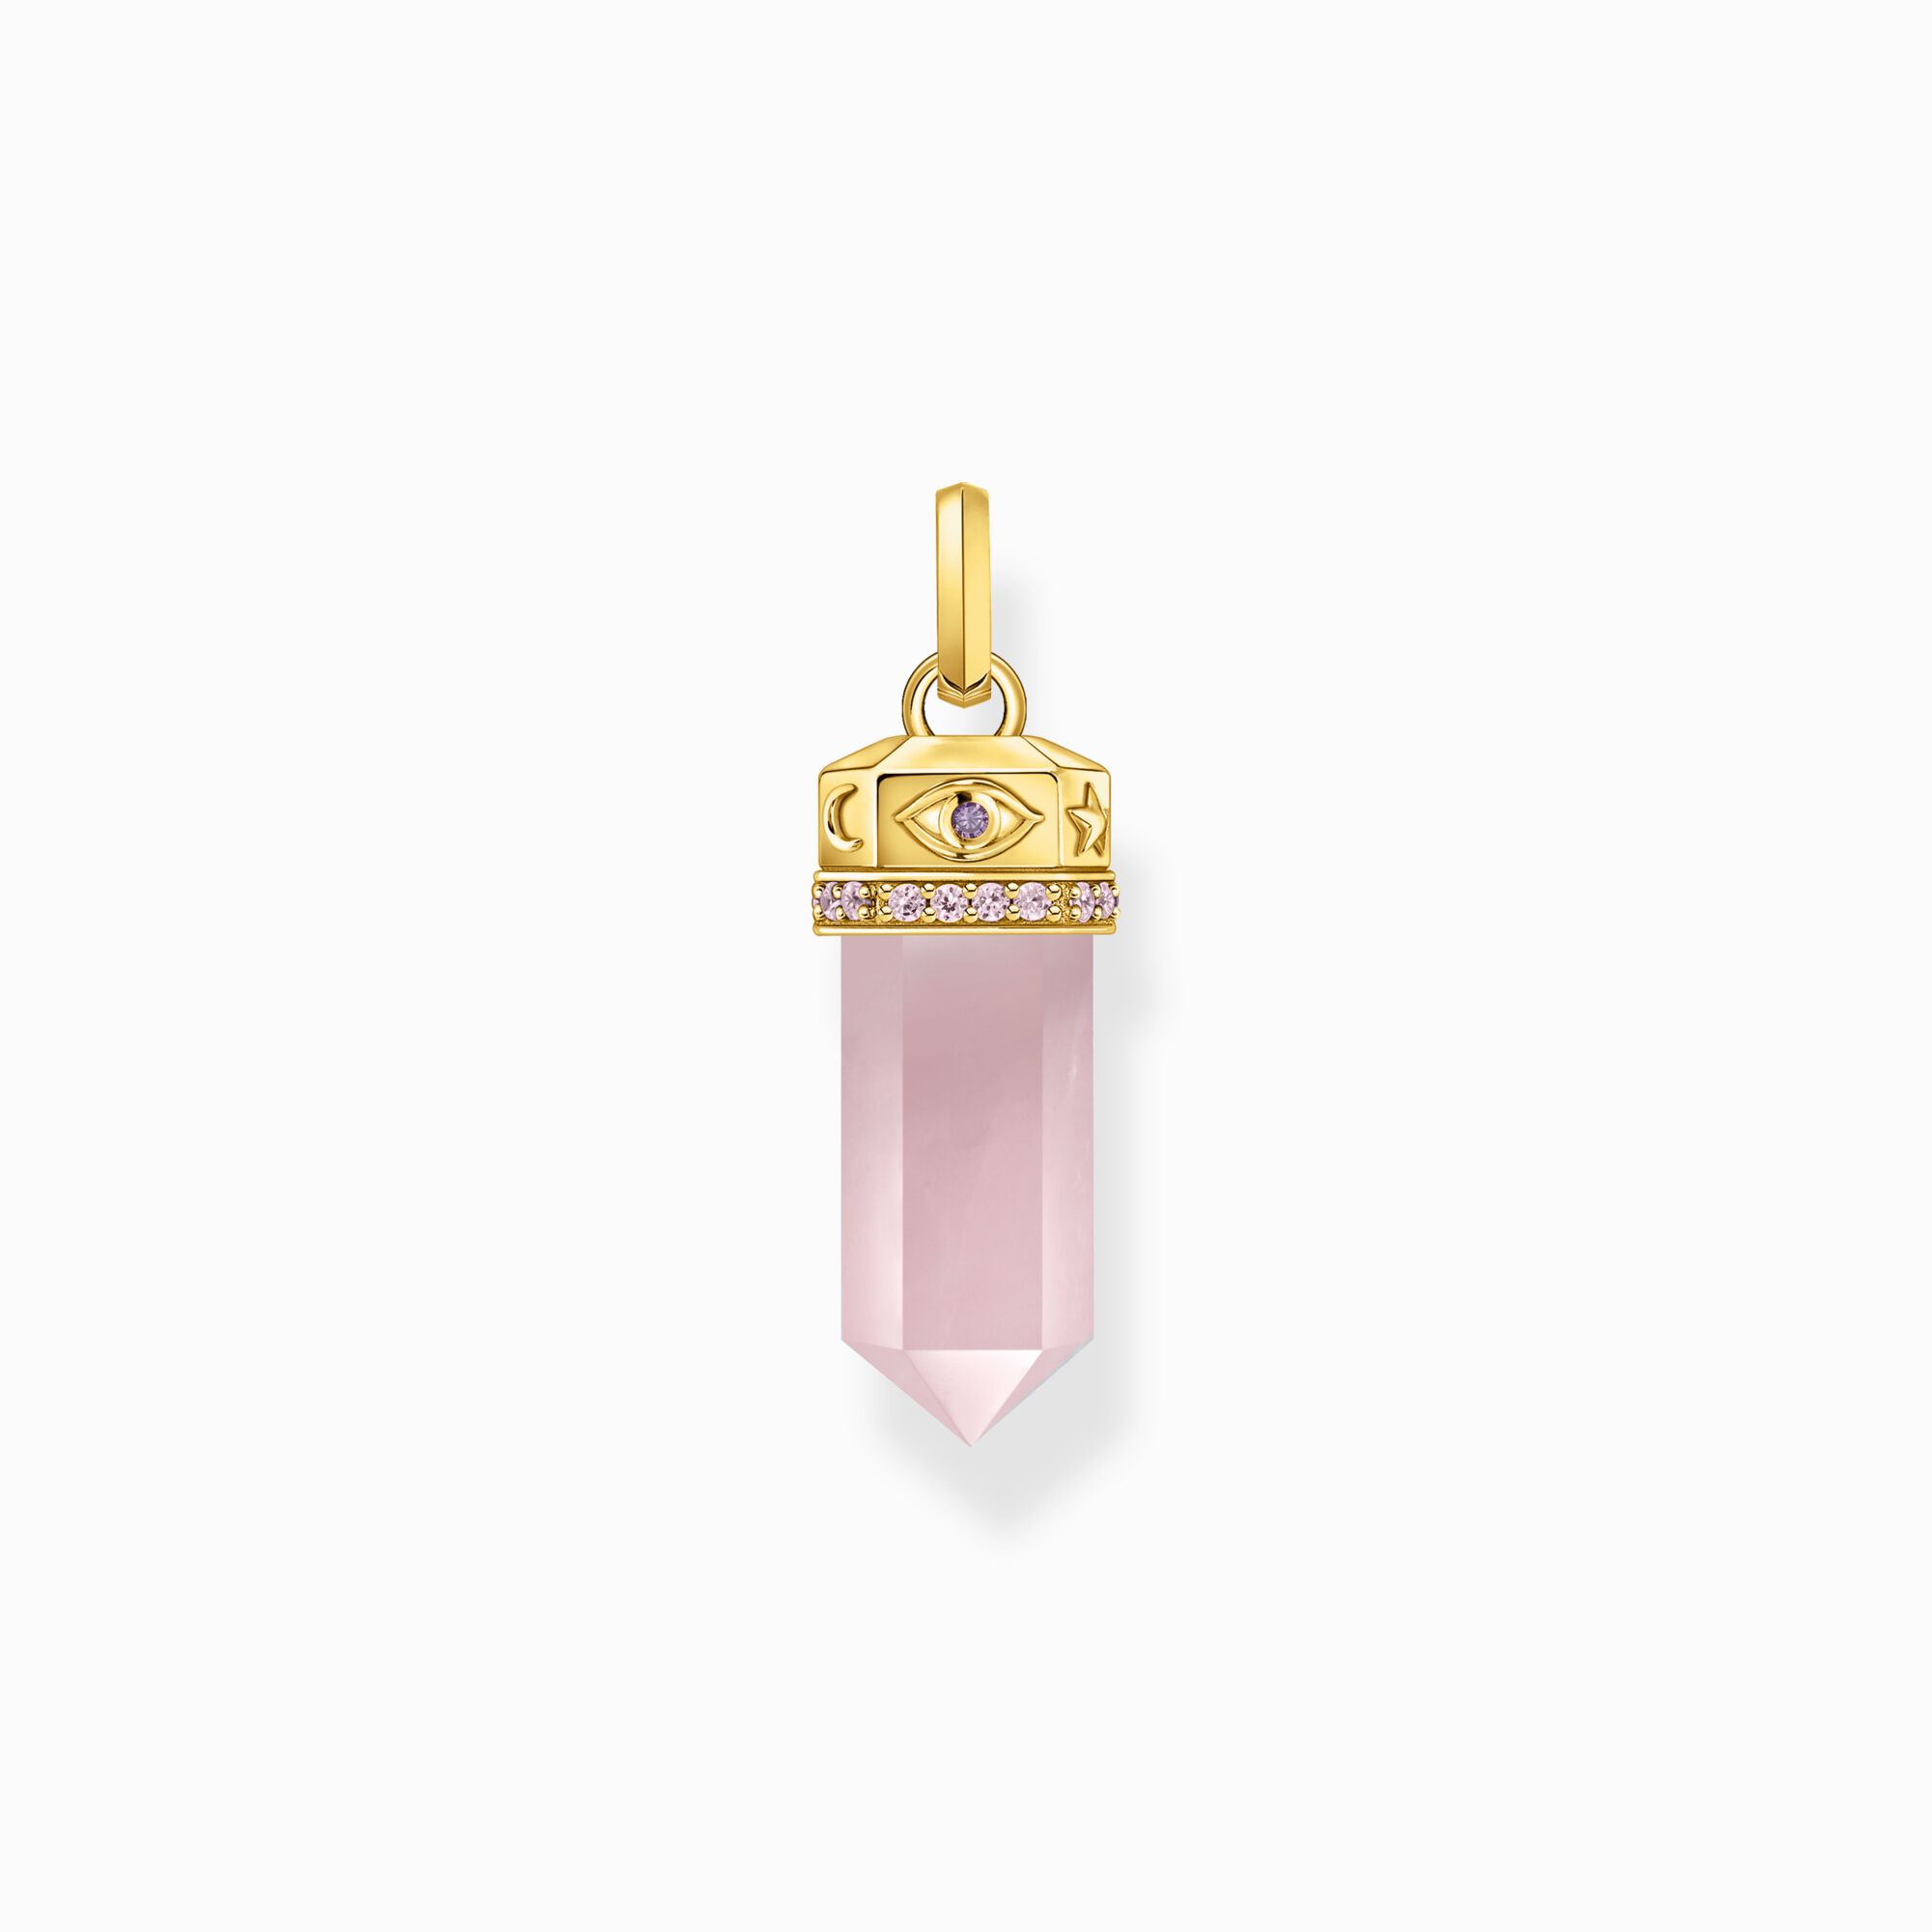 Gold-plated hexagonal pendant with rose quartz from the  collection in the THOMAS SABO online store